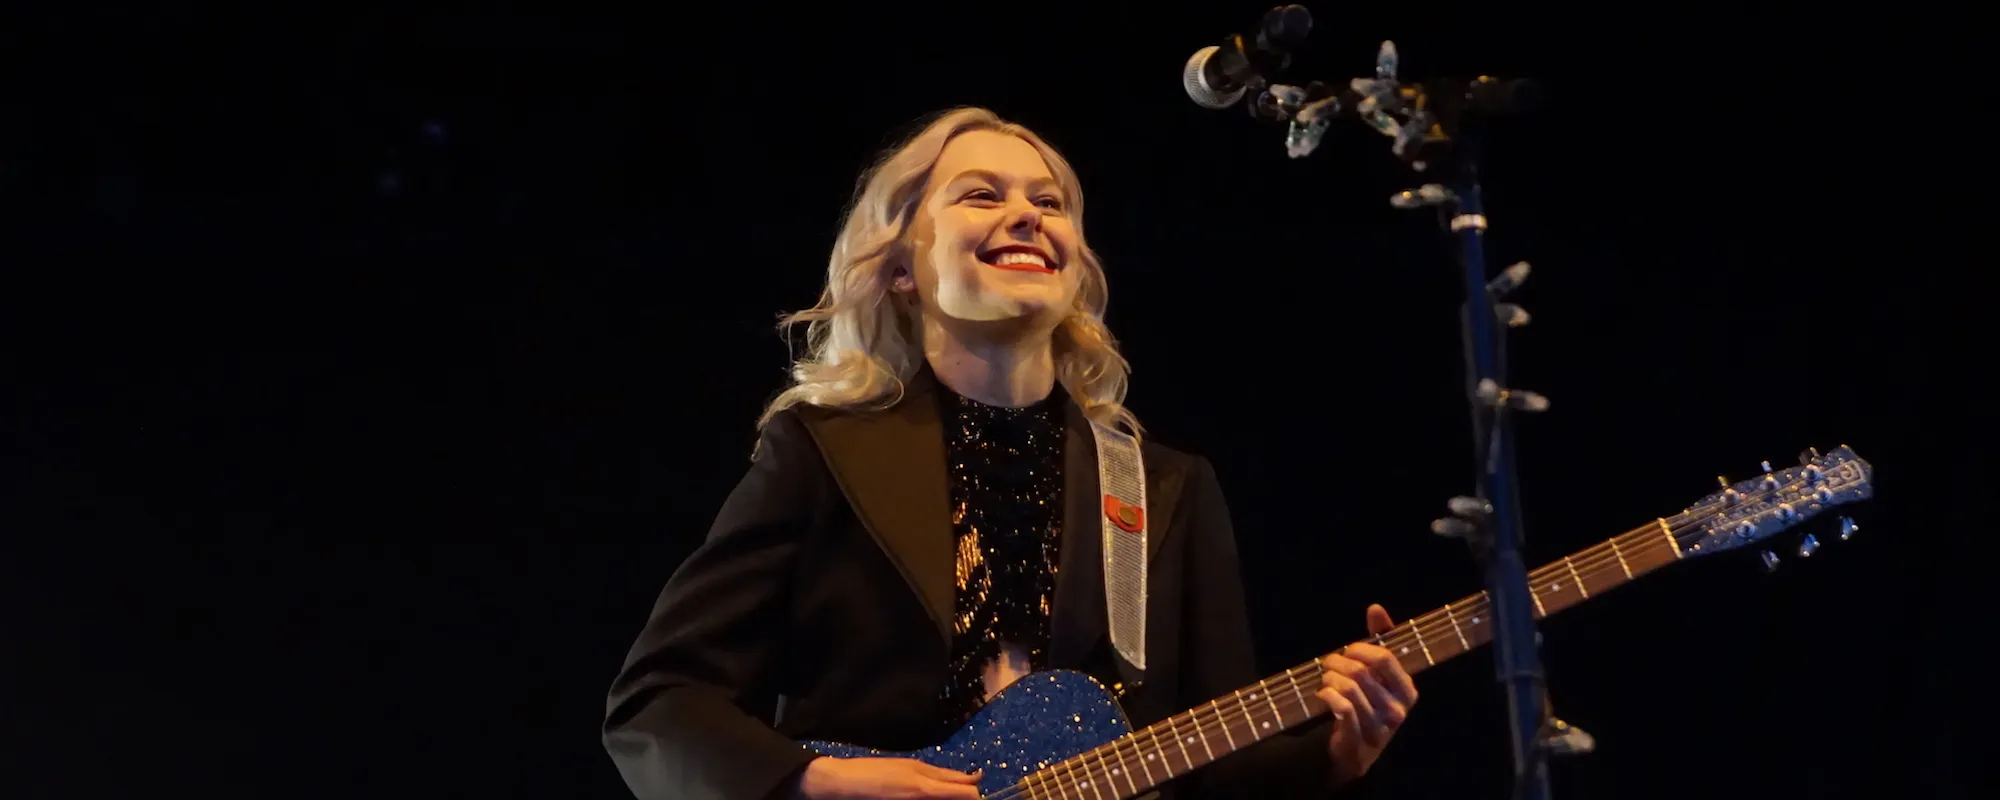 Phoebe Bridgers Opens Up About Her Abortion Story The Same Day as Roe V. Wade is Overturned